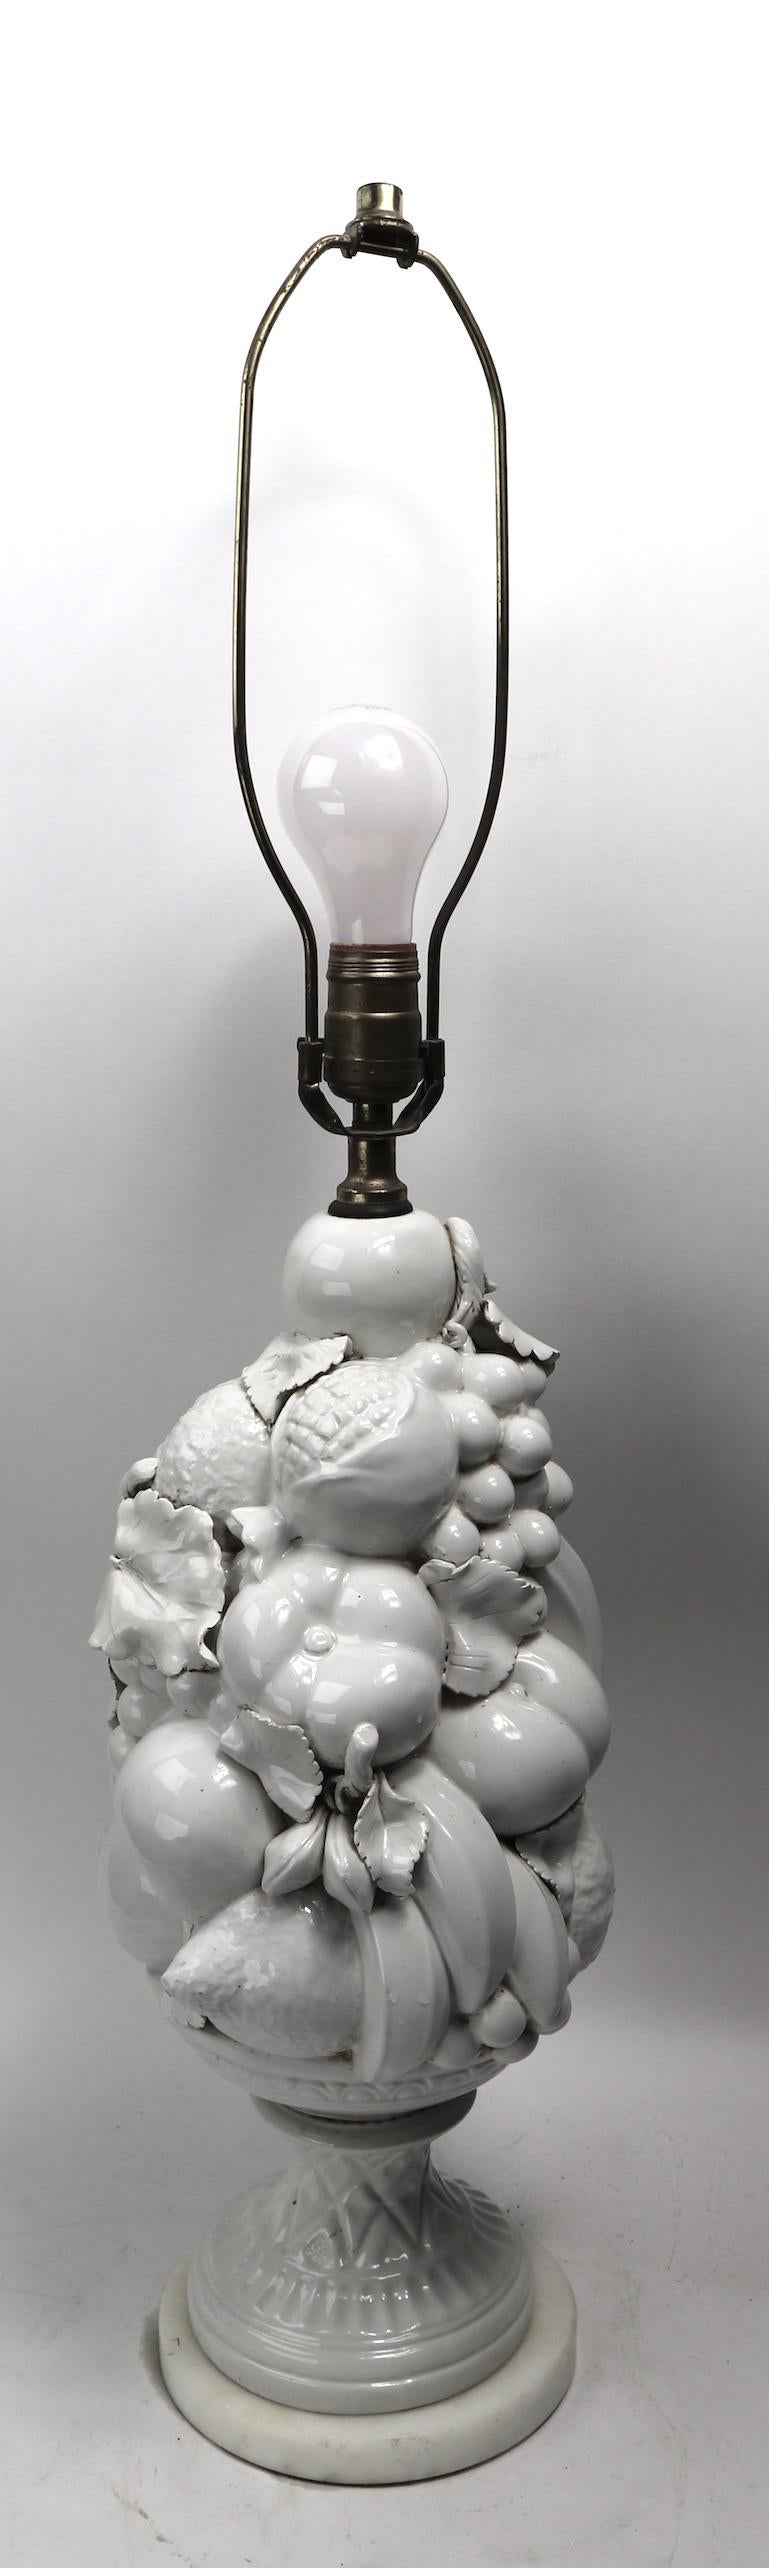 Nice decorative white glaze ceramic table lamp on marble disk base. Original, clean and working condition, accepts standard size screw in bulb, shade not included. Height to top of ceramic body 19.5 total height, 32.5 diameter. Of base 6 x diameter